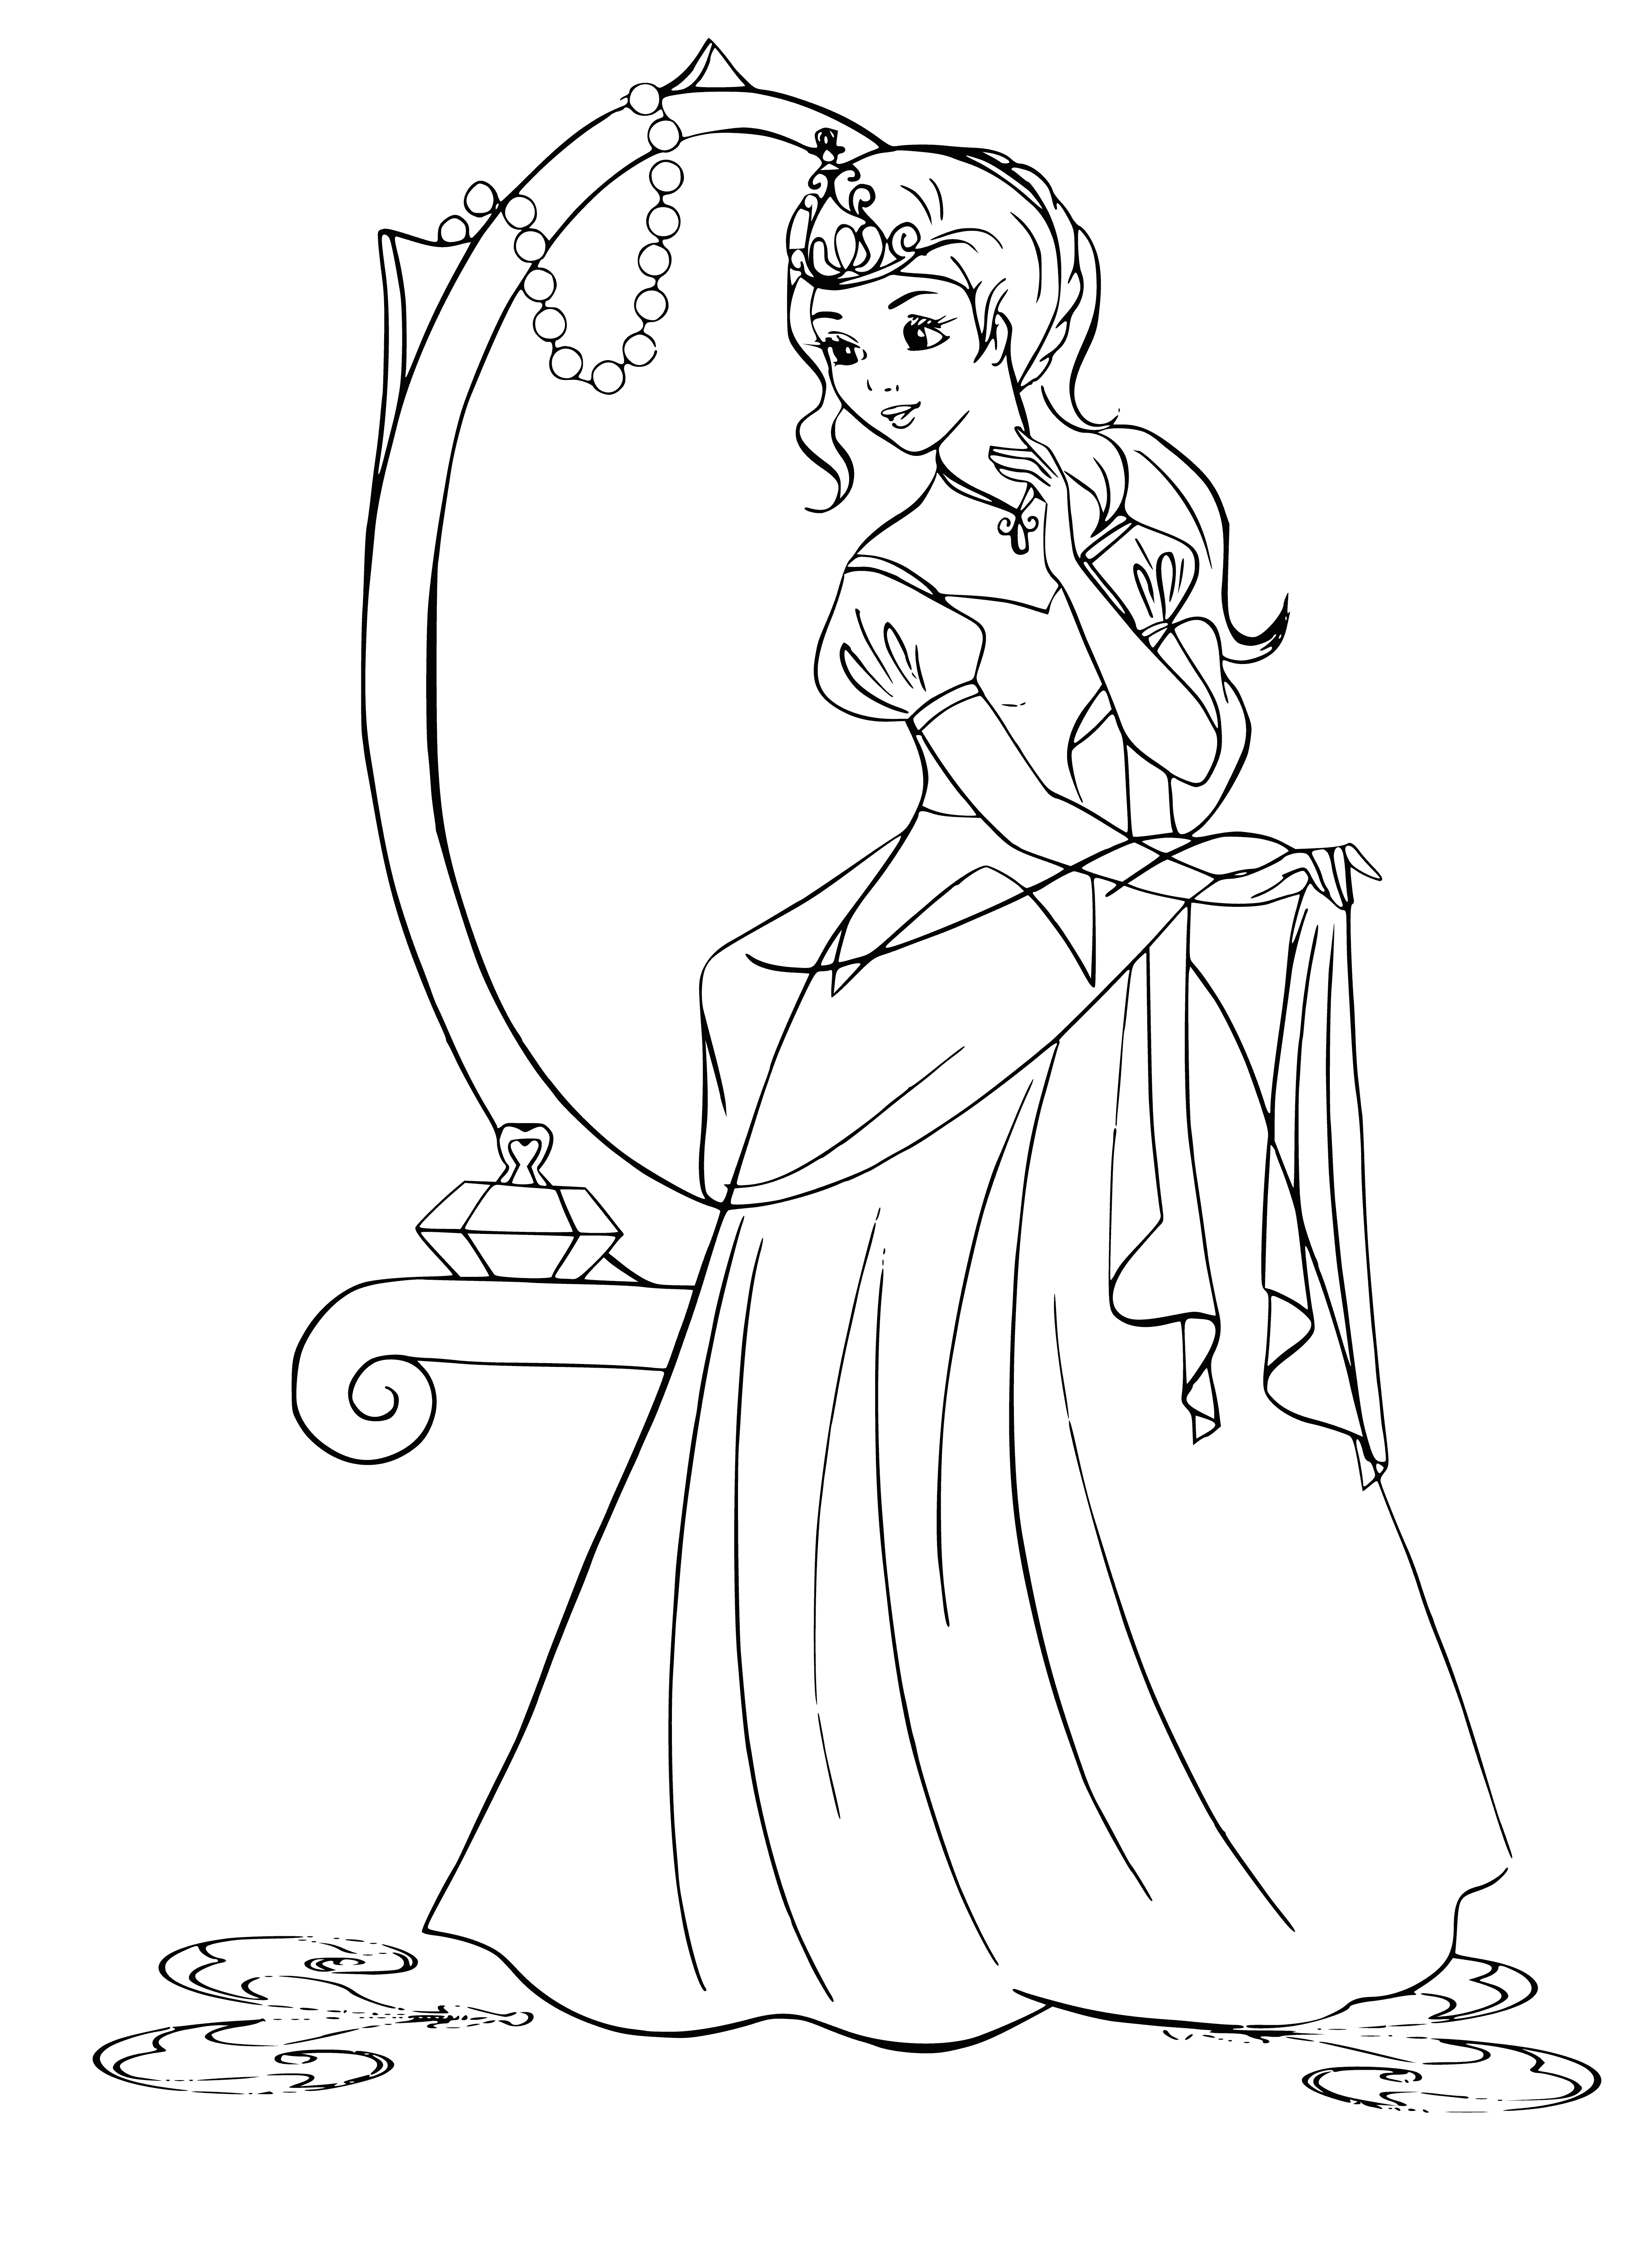 Princess in front of the mirror coloring page